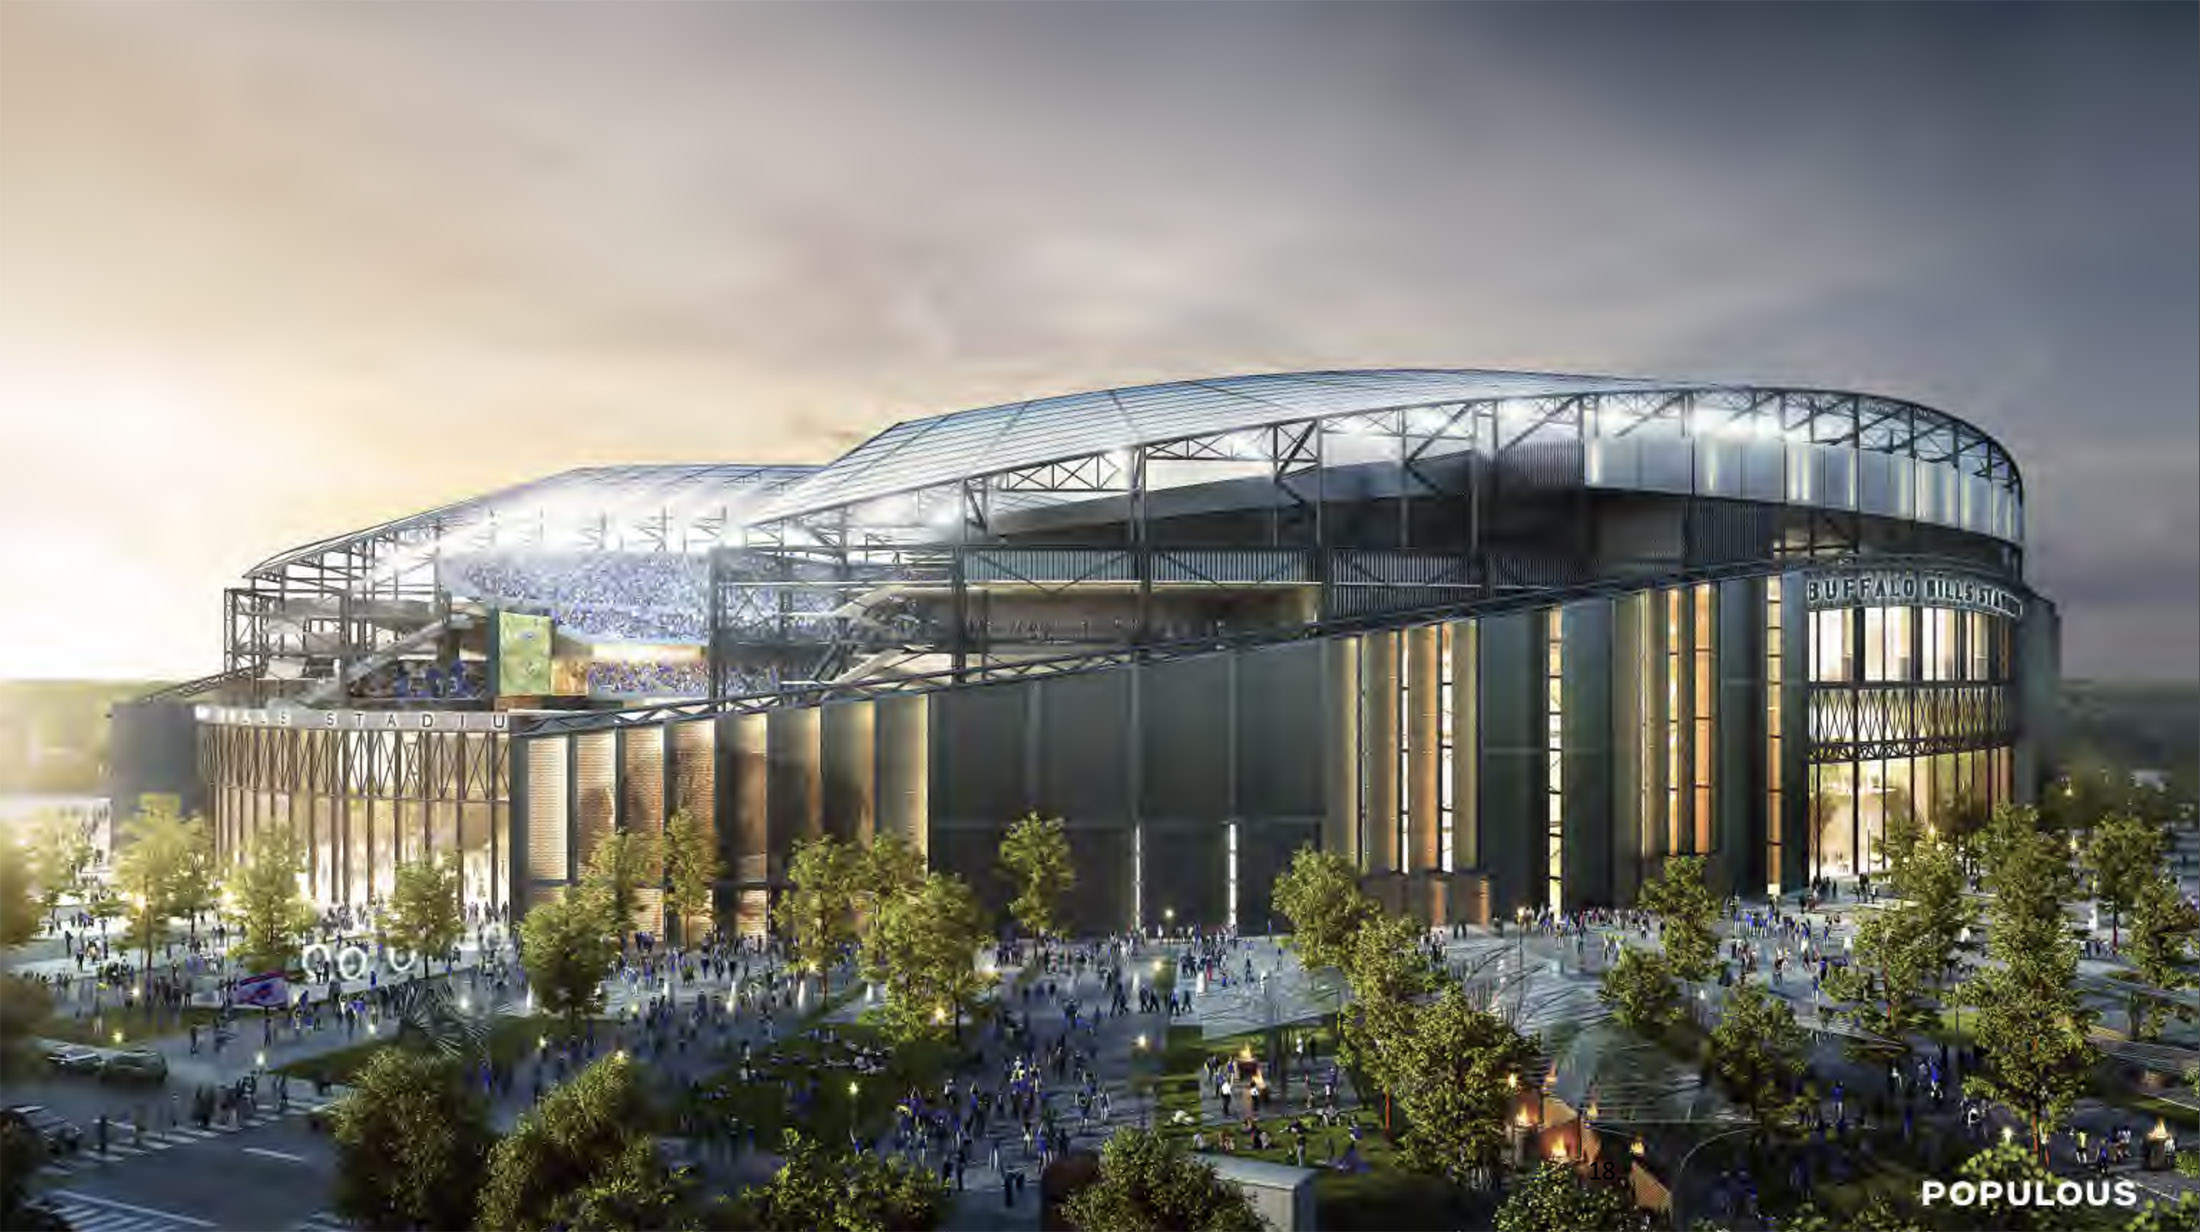 Why do pro sports teams get tax breaks to build new stadiums